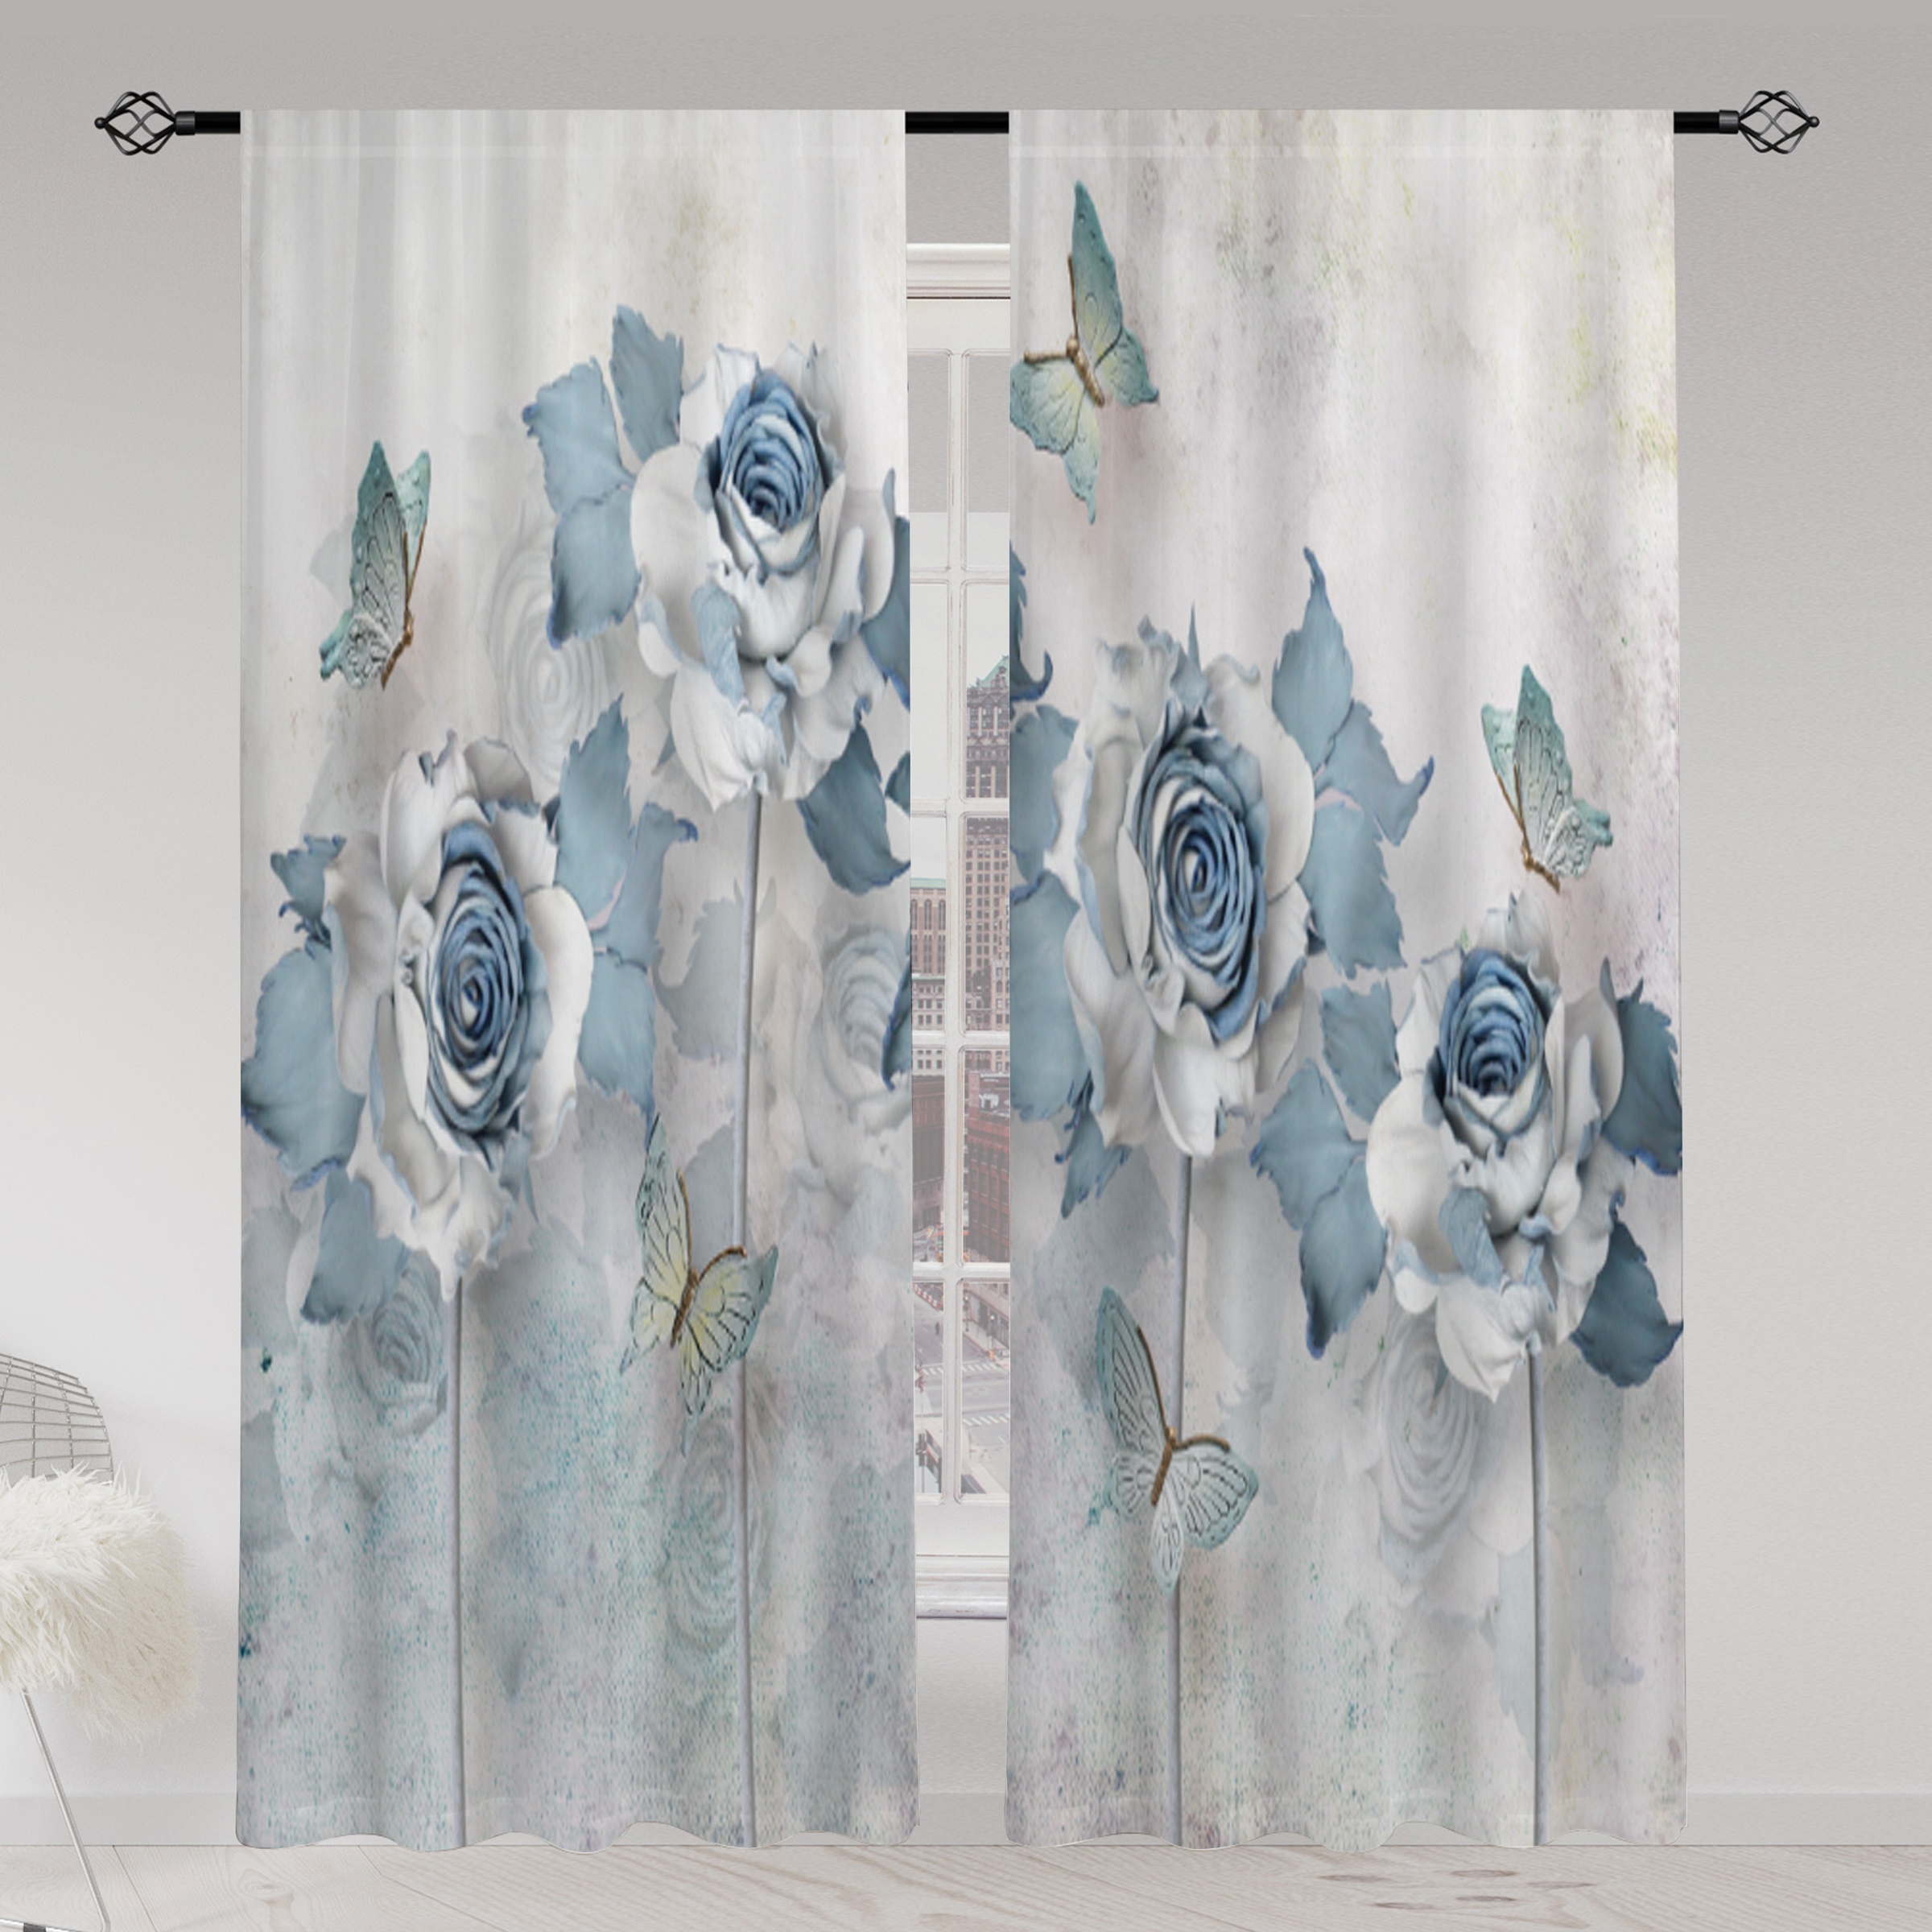 

2pcs, Three-dimensional Flower Butterfly Printed Translucent Curtains, Multi-scene Polyester Rod Pocket Decorative Curtains For Living Room Game Room Bedroom Home Decor Party Supplies